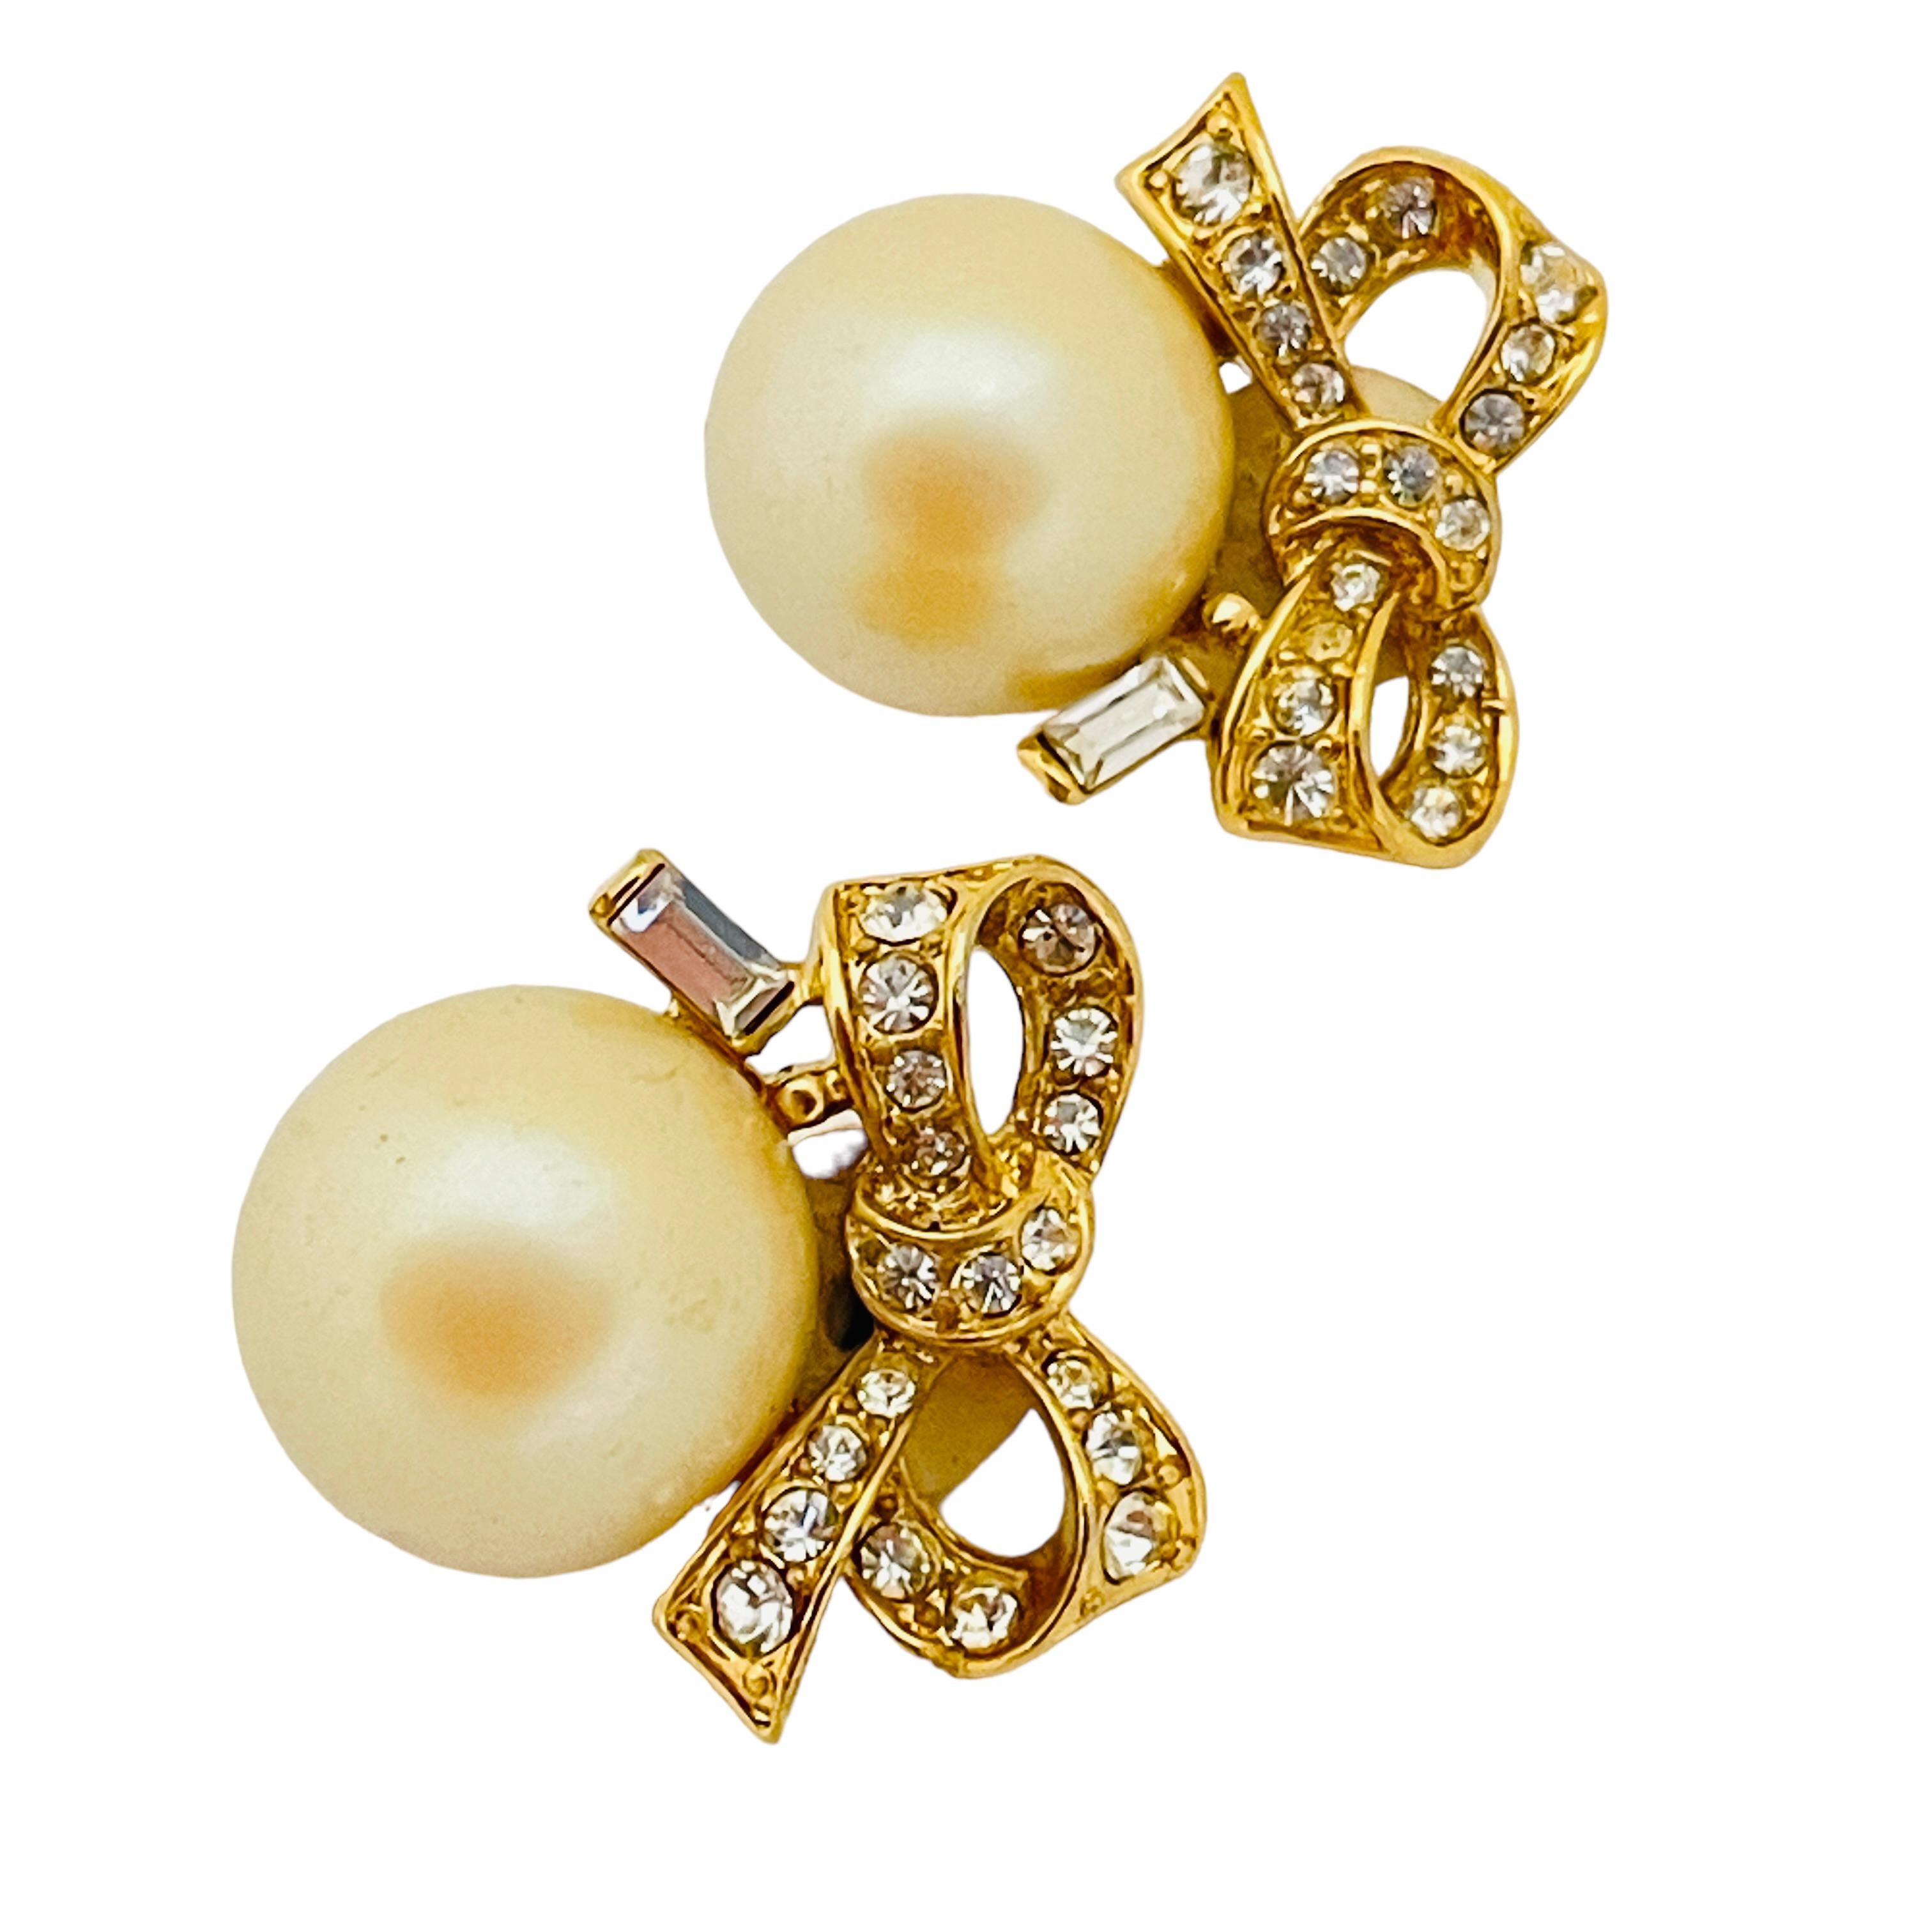 DETAILS

• signed NINA RICCI

• gold tone with faux pearl and rhinestones 

• vintage designer runway earrings

MEASUREMENTS

•

CONDITION 

• excellent vintage condition with minimal signs of wear

SKU 34


❤️❤️ VINTAGE DESIGNER JEWELRY ❤️❤️
❤️❤️